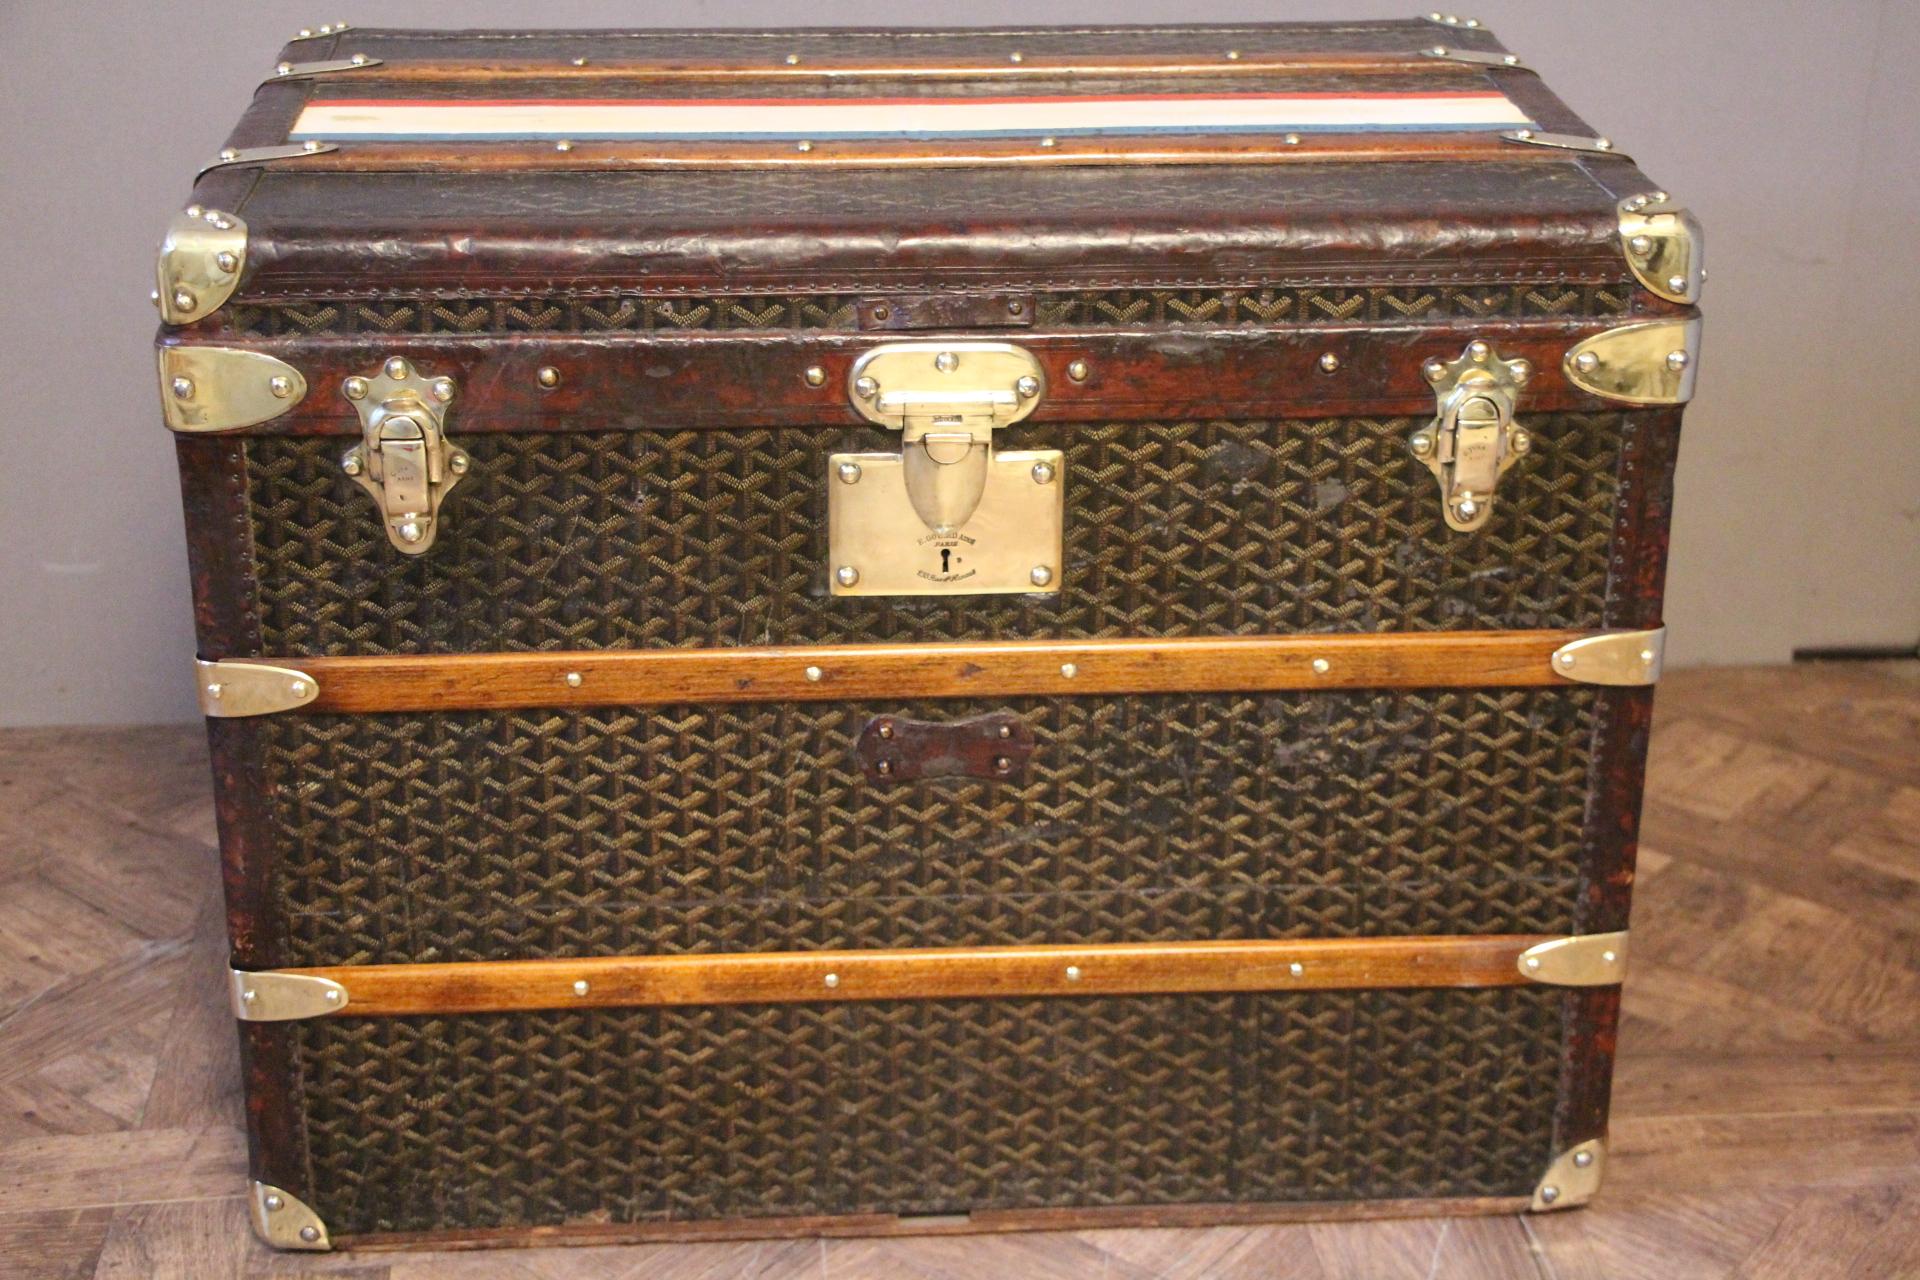 Top of the range Goyard hat trunk in the typical Goyard canvas,it features wood slats, leather trim, all brass fittings: corners, studs, Goyard stamped locks and side handles.
French flag all around and on its sides.
Beautiful and rich